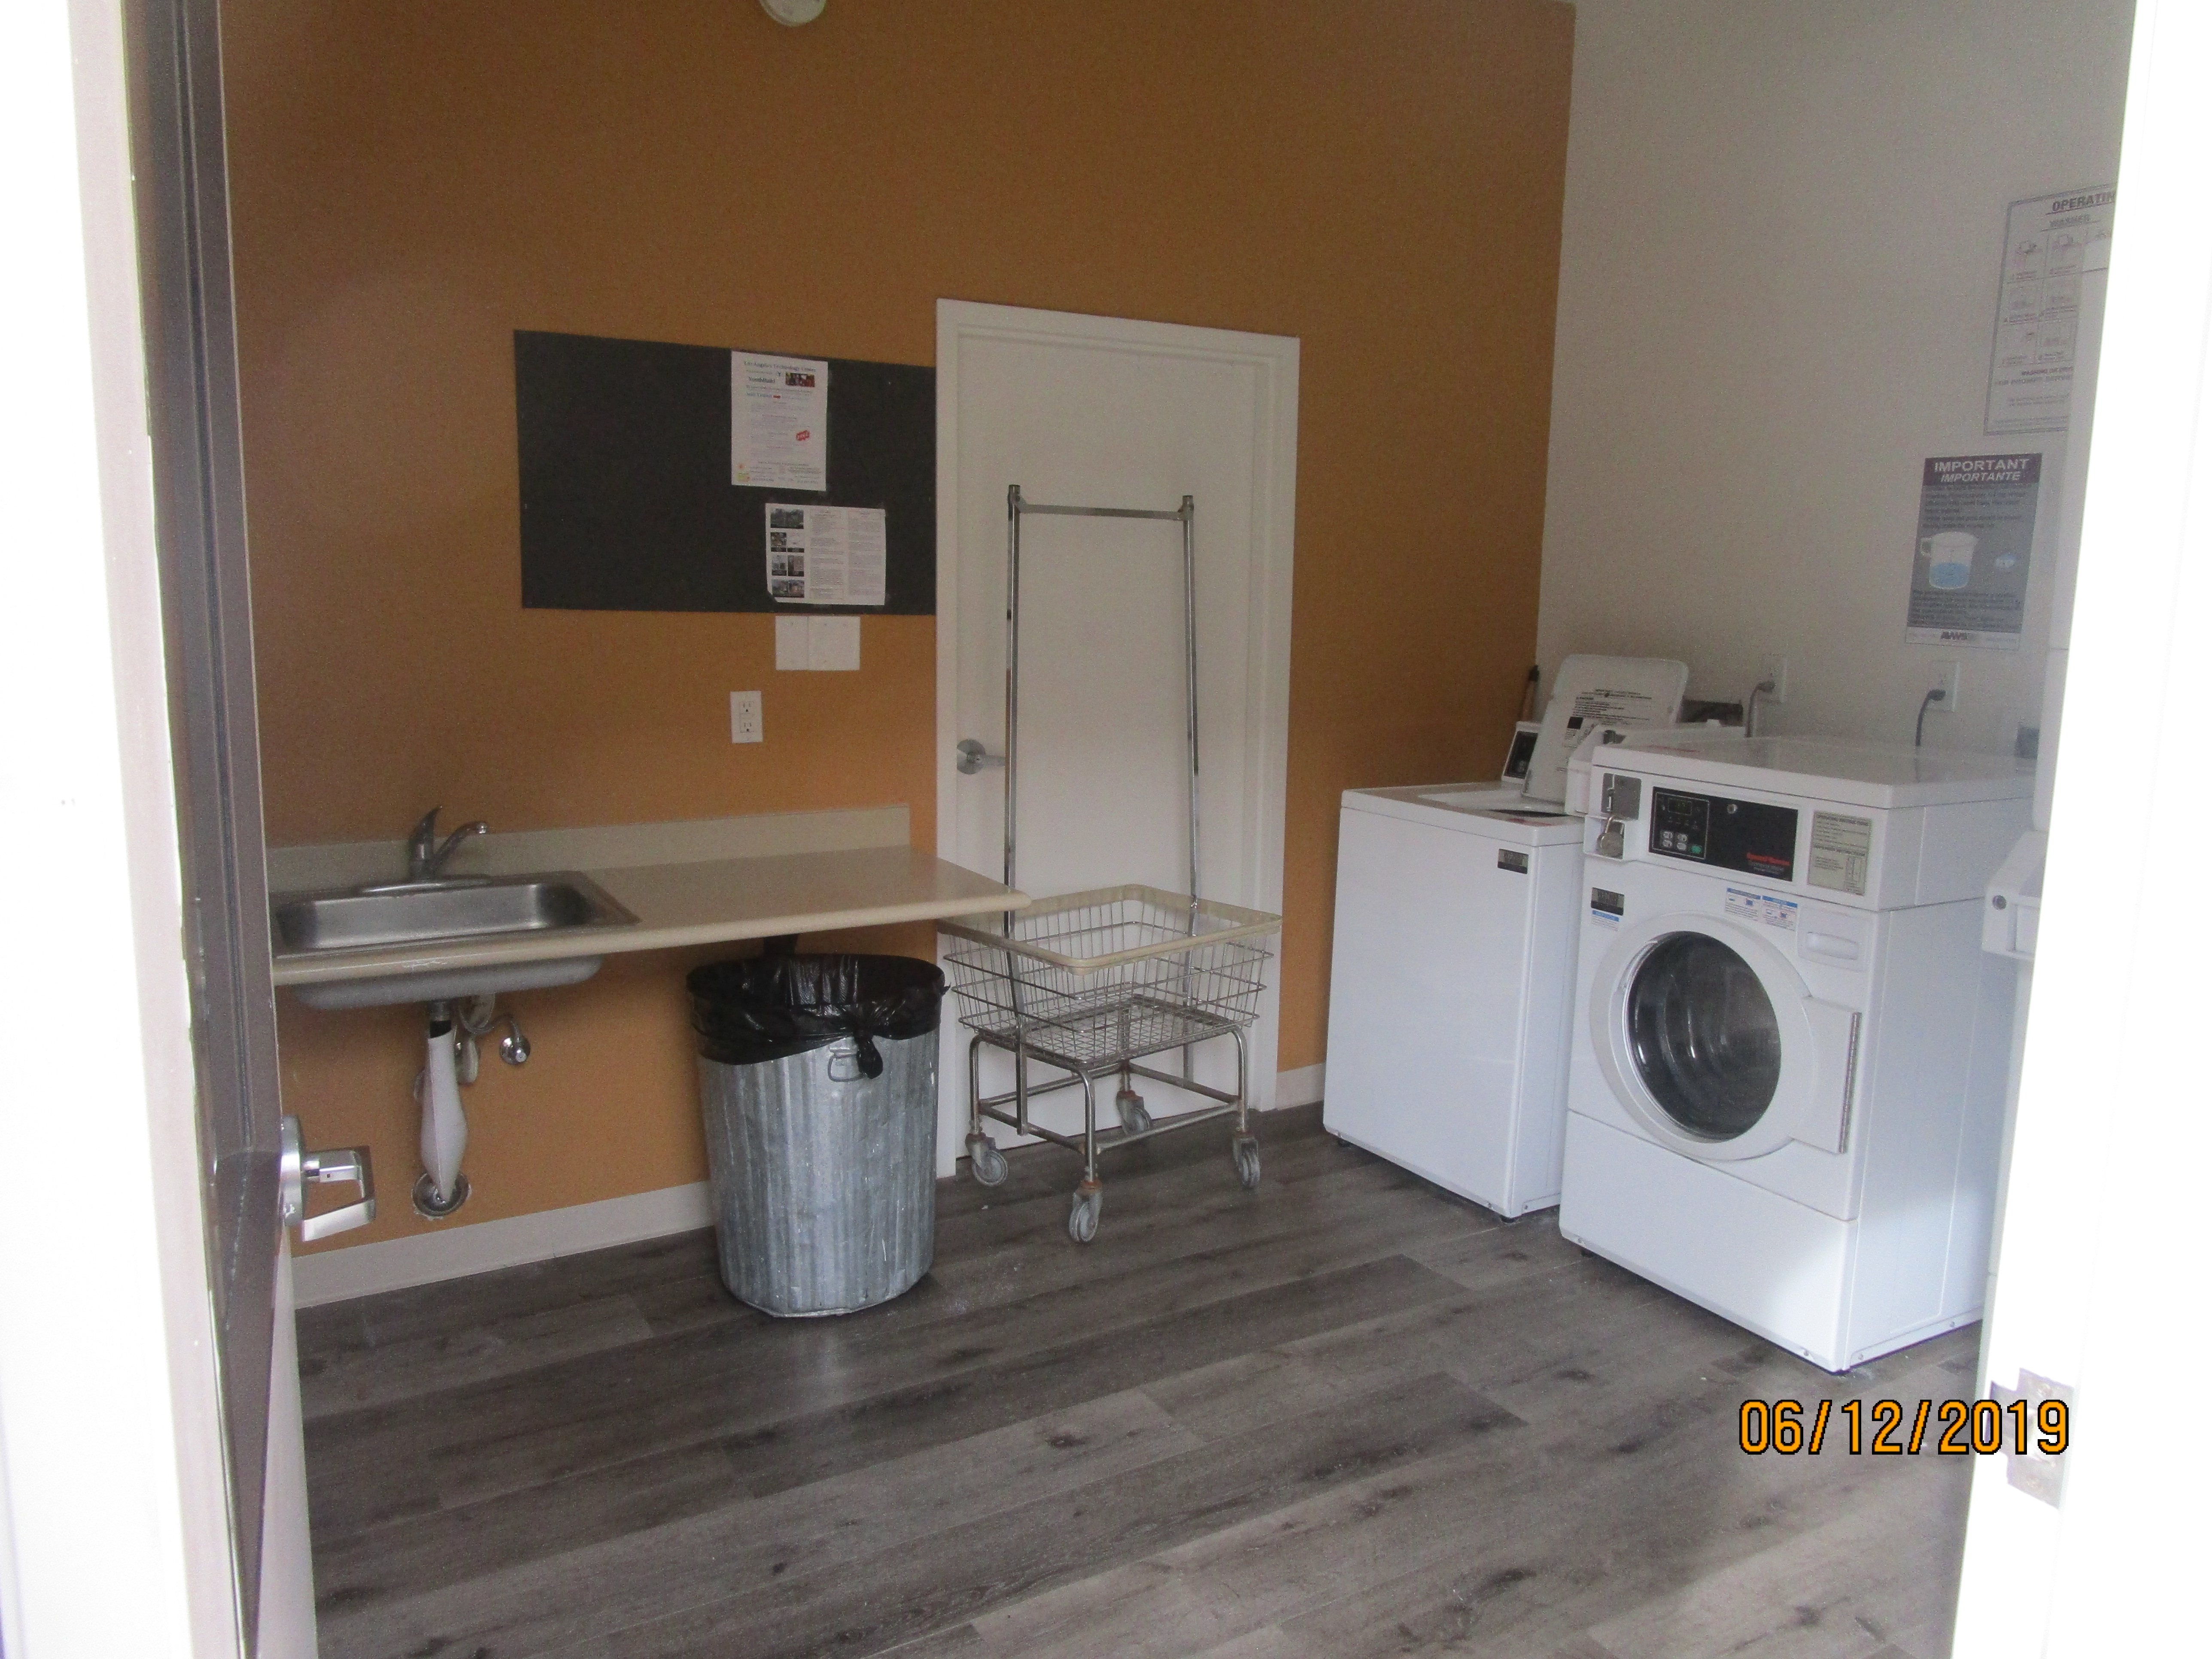 Image of the building laundry room equipped with a machine, trash can and notice board